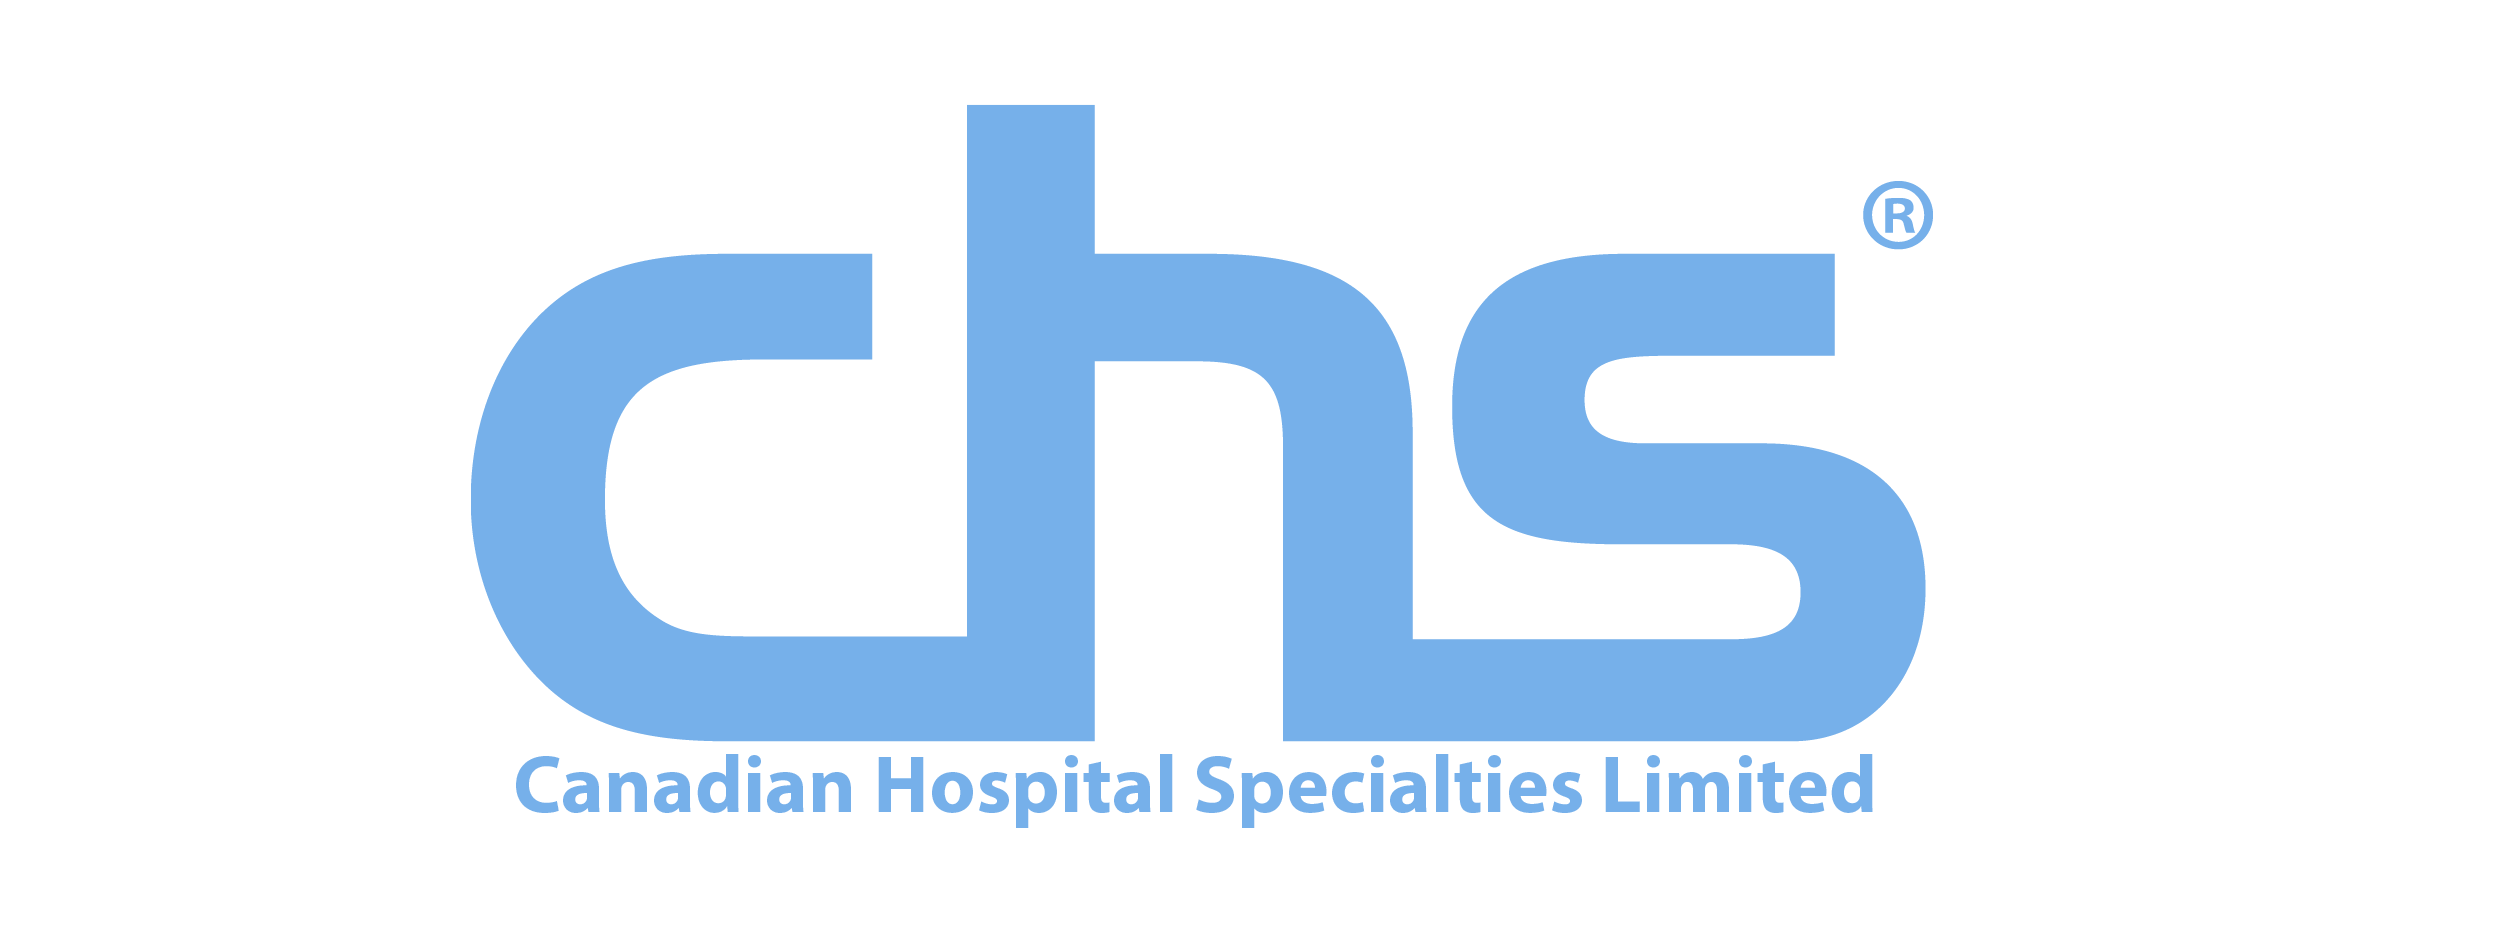 Canadian Hospital Specialties Limited